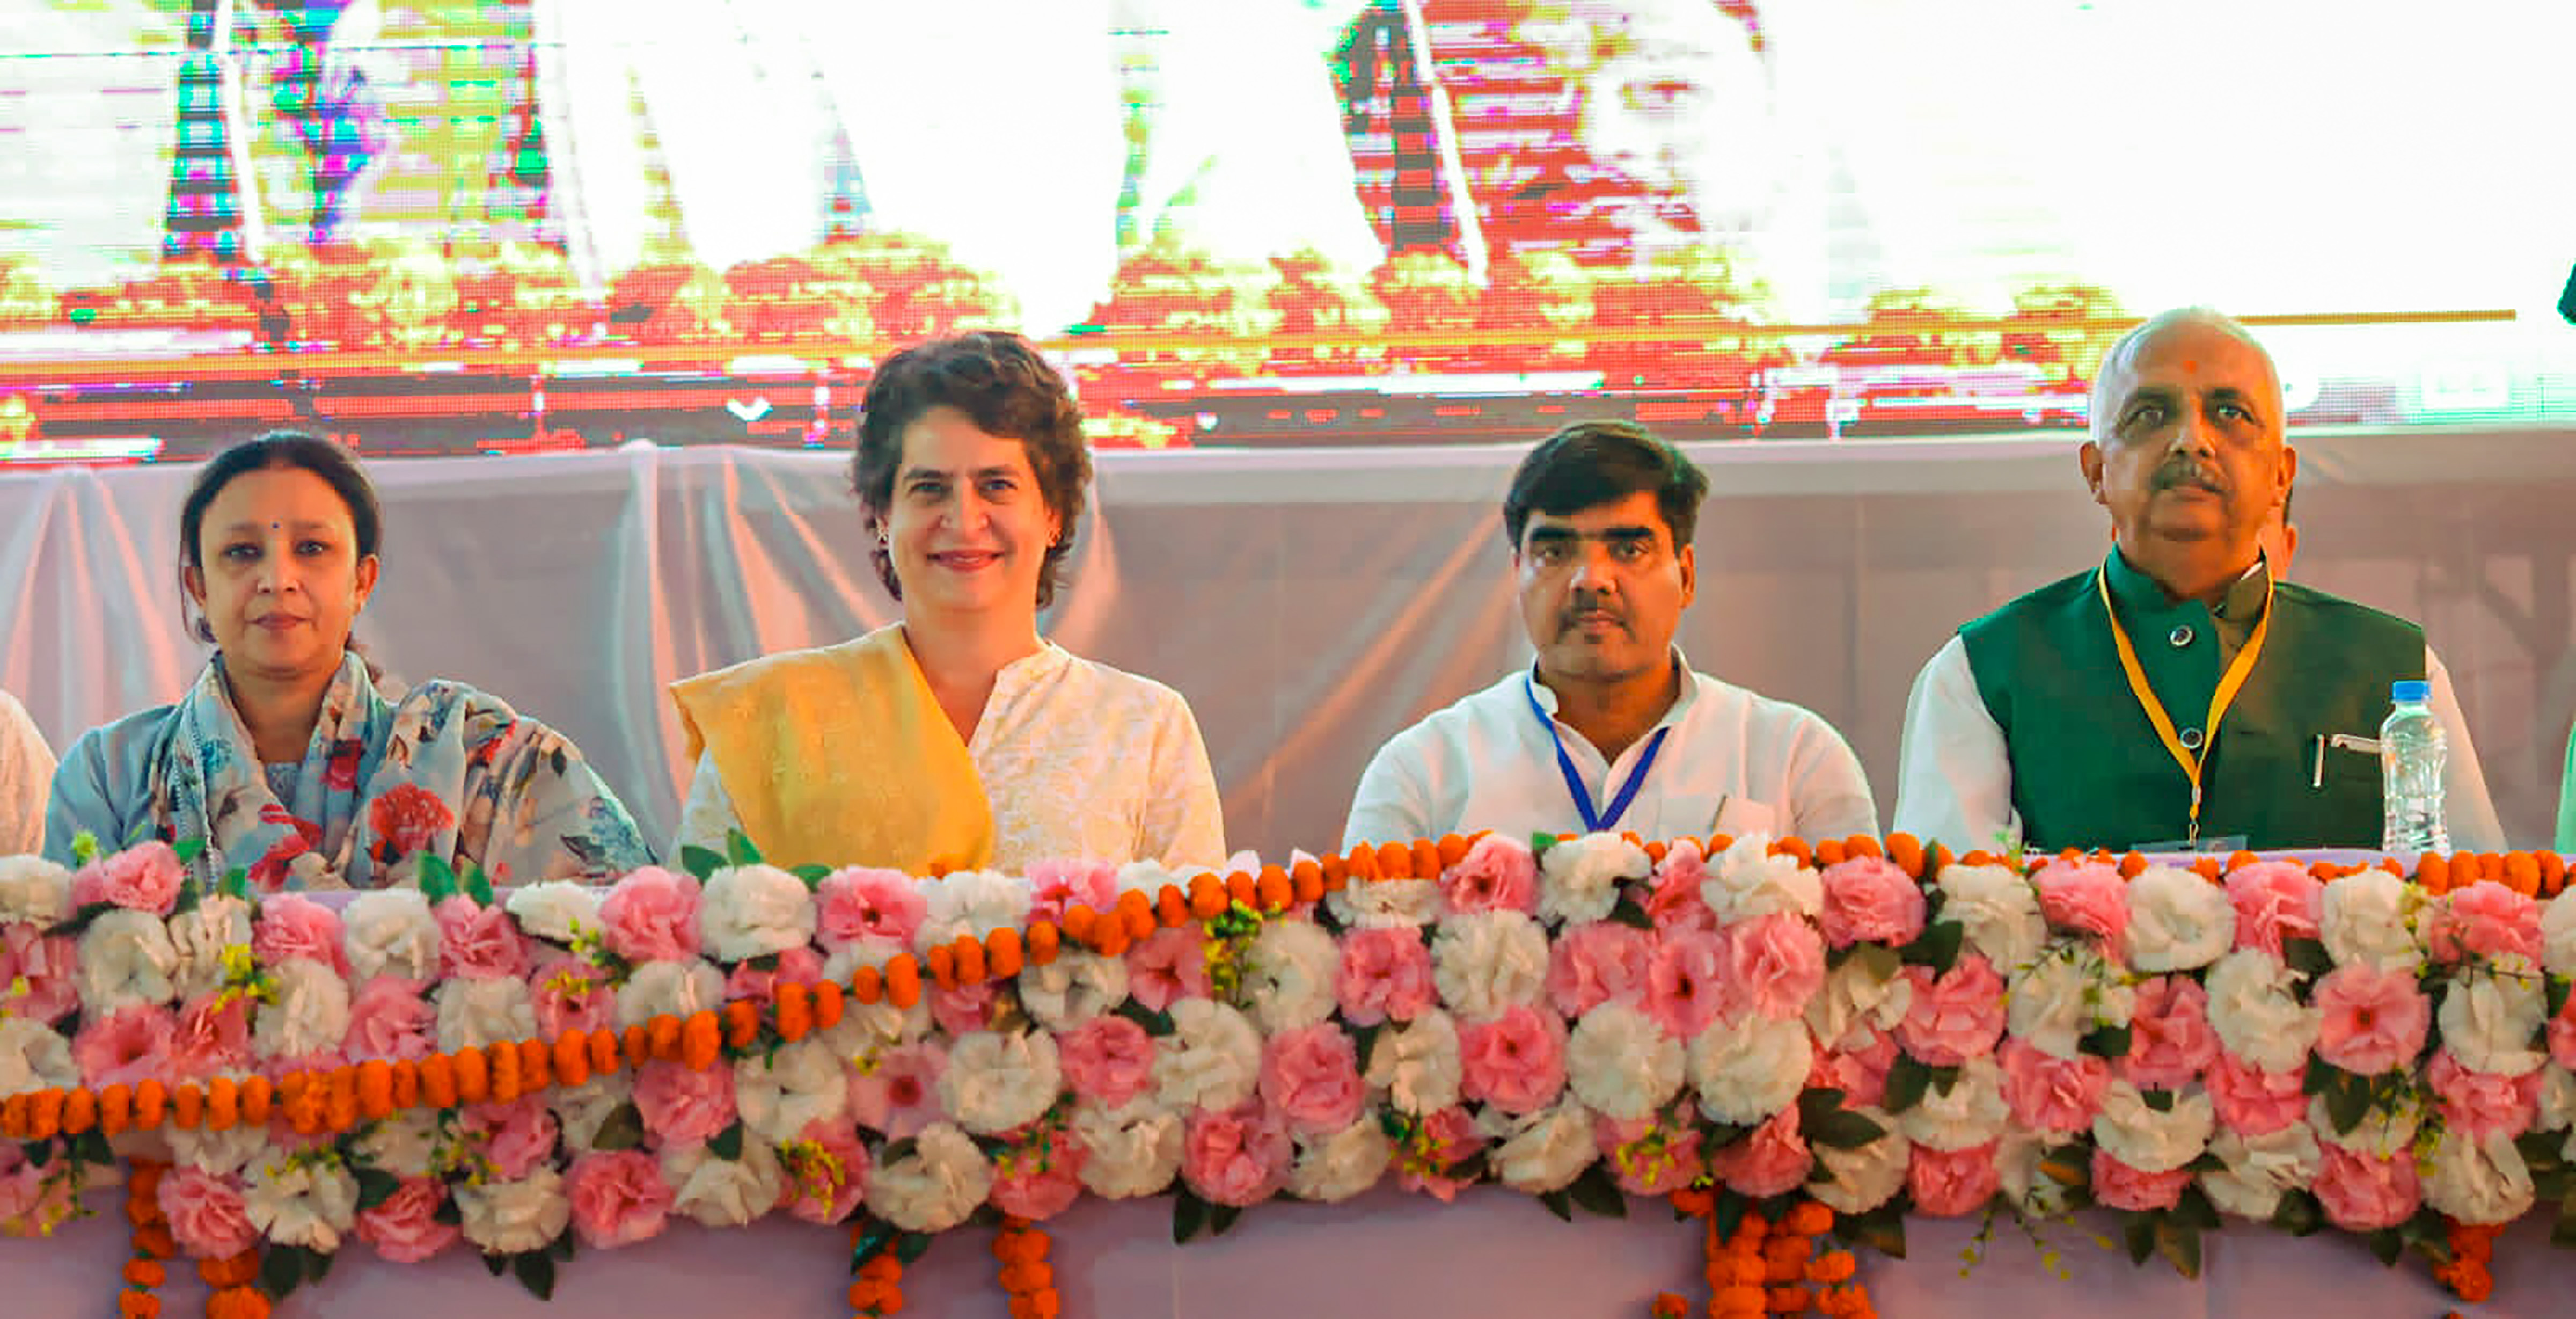 Don’t be disheartened, work with ‘double energy’ towards victory: Priyanka Gandhi to UP Congress workers